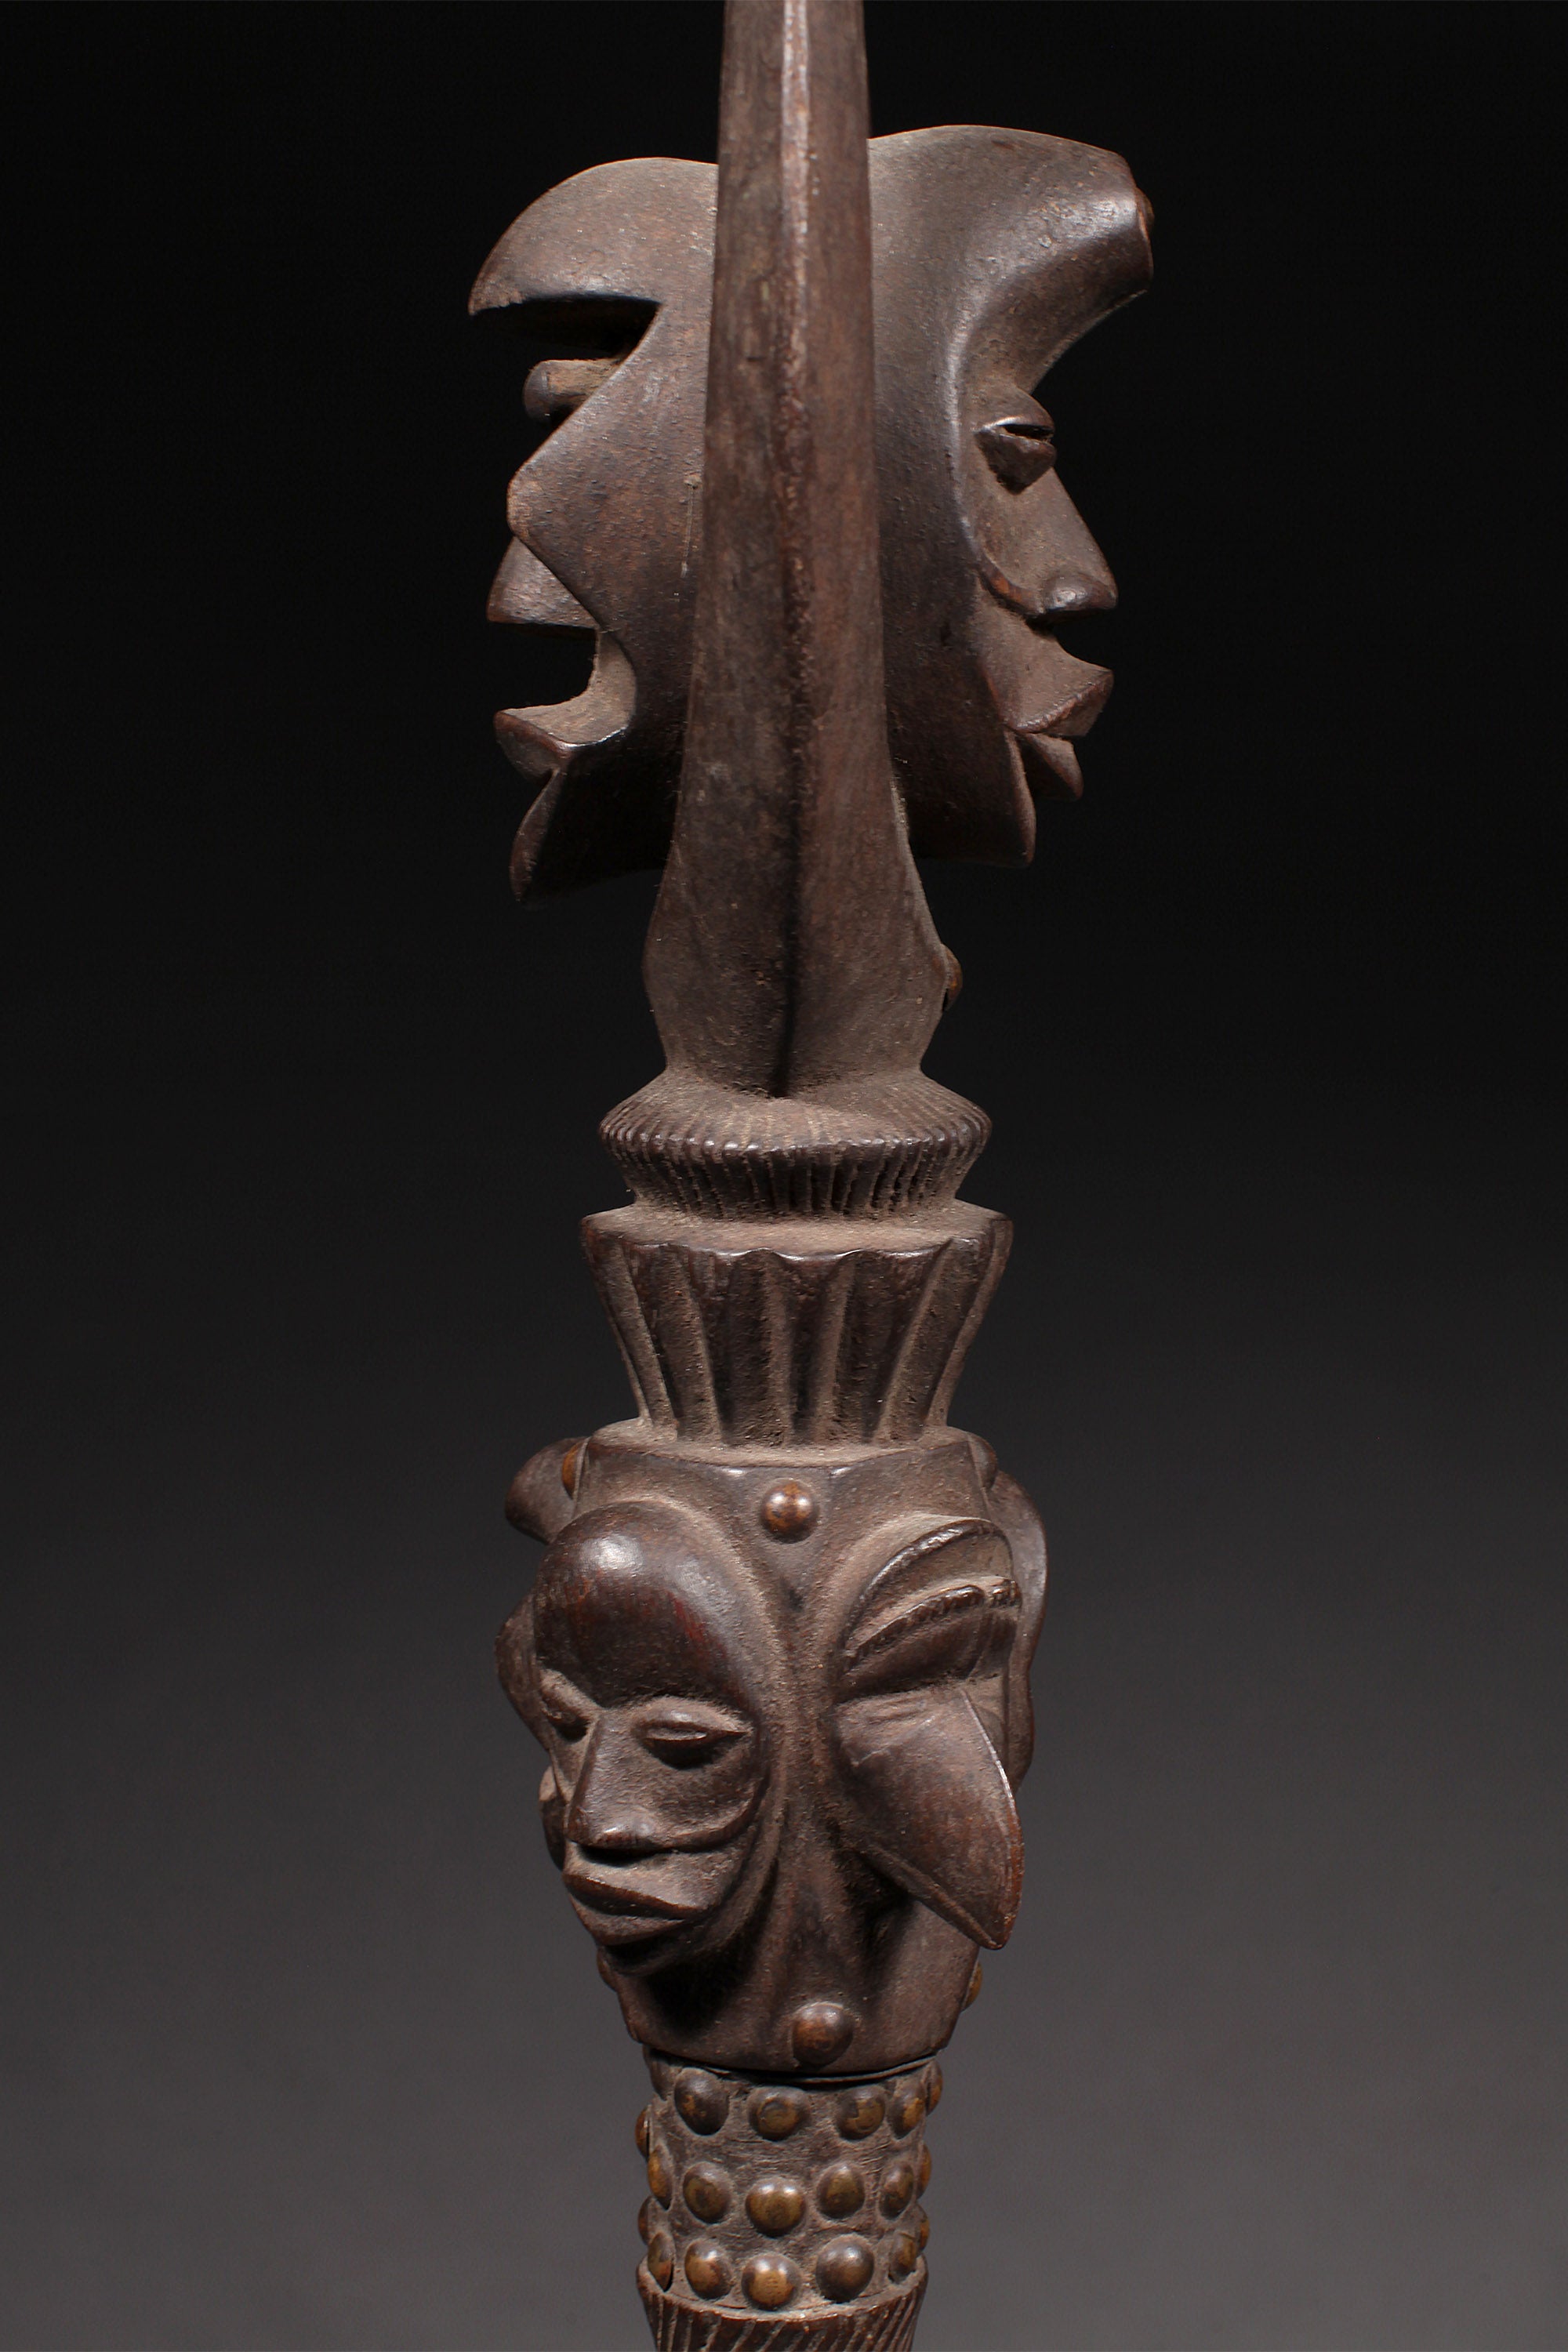 Tribal Objects - African Tribal Art - Ancient Ceremonial Art - Handcrafted Artifacts - Masks - Wood Sculptures - Iron Bronze Objects - Textiles - Art Pieces - African Folk Art - This exquisite Prestige Object from the Dan Tribe of the Ivory Coast is crafted from expertly carved wood and iron. An heirloom-quality artifact, it is a stunning representation of the tribe's art and an elegant addition to any collection of African tribal art. H: 57